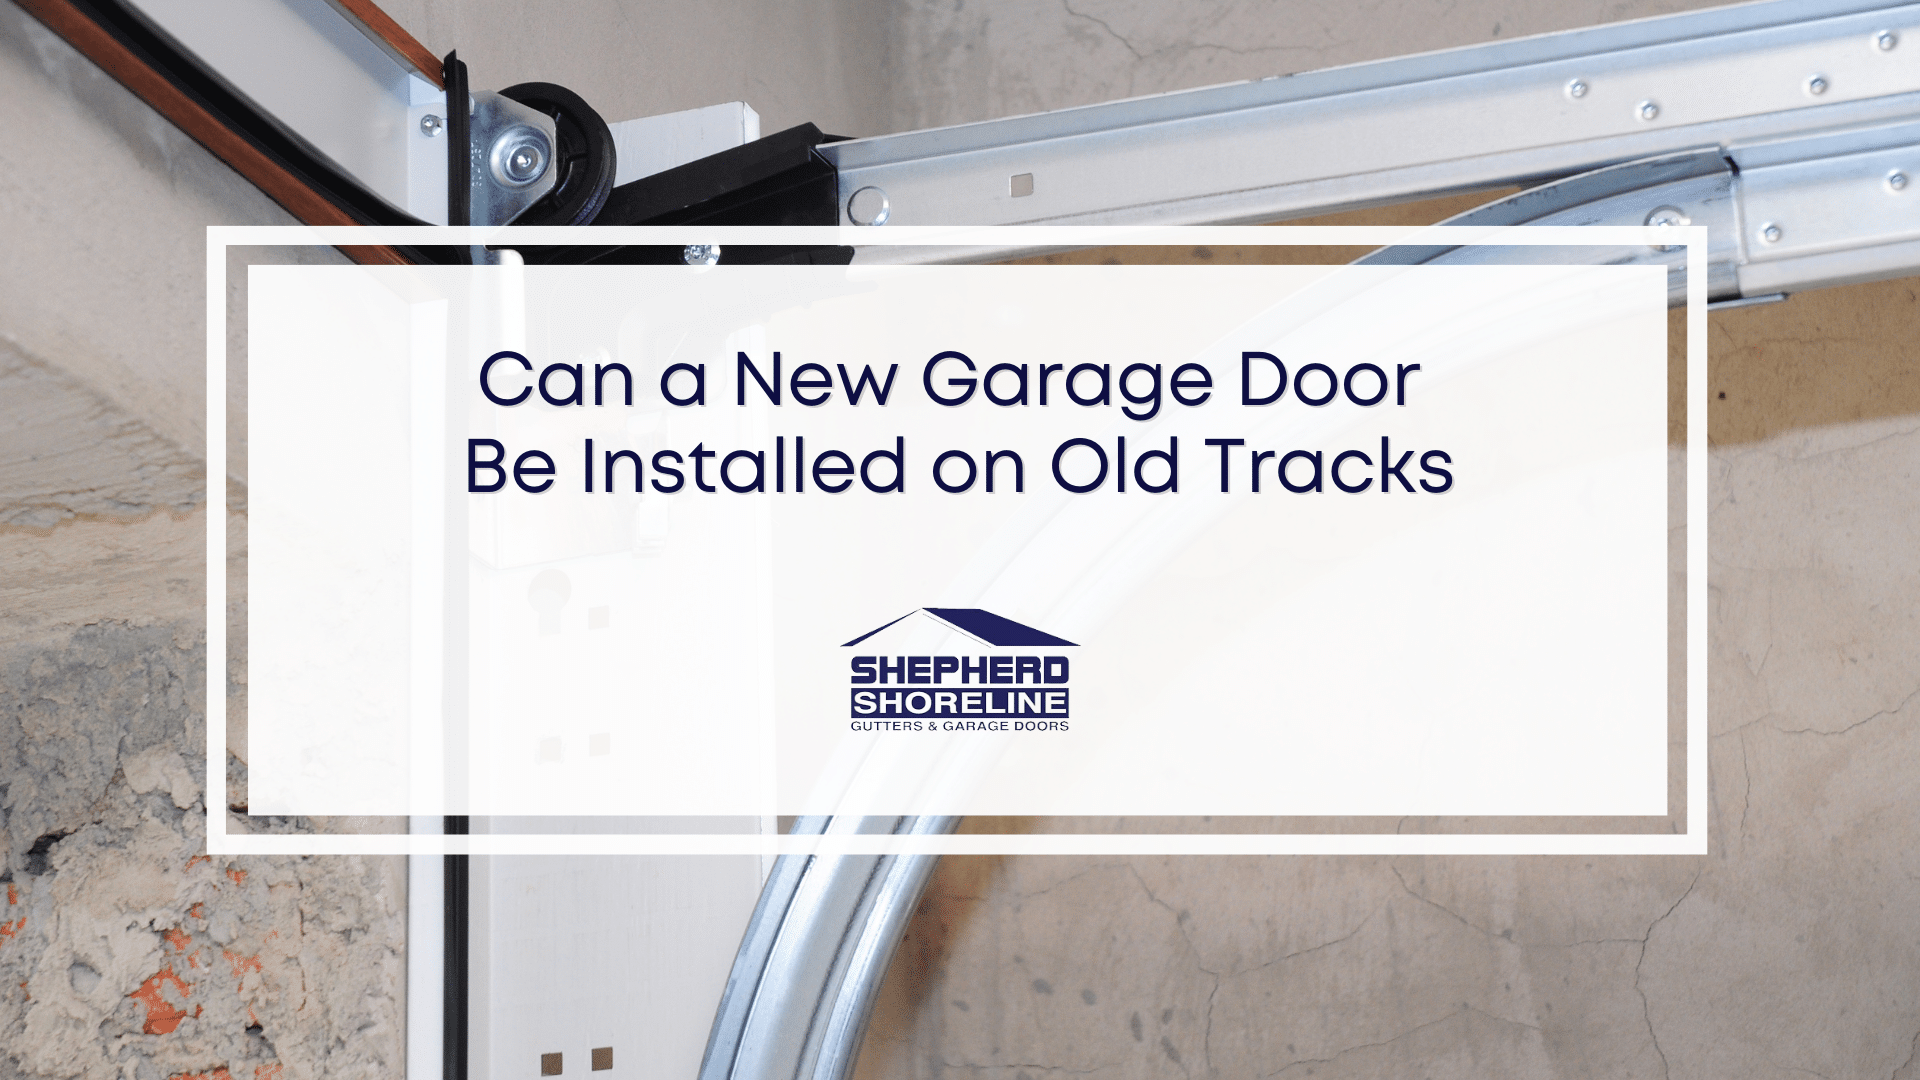 Featured image of can a new garage door be installed on old tracks